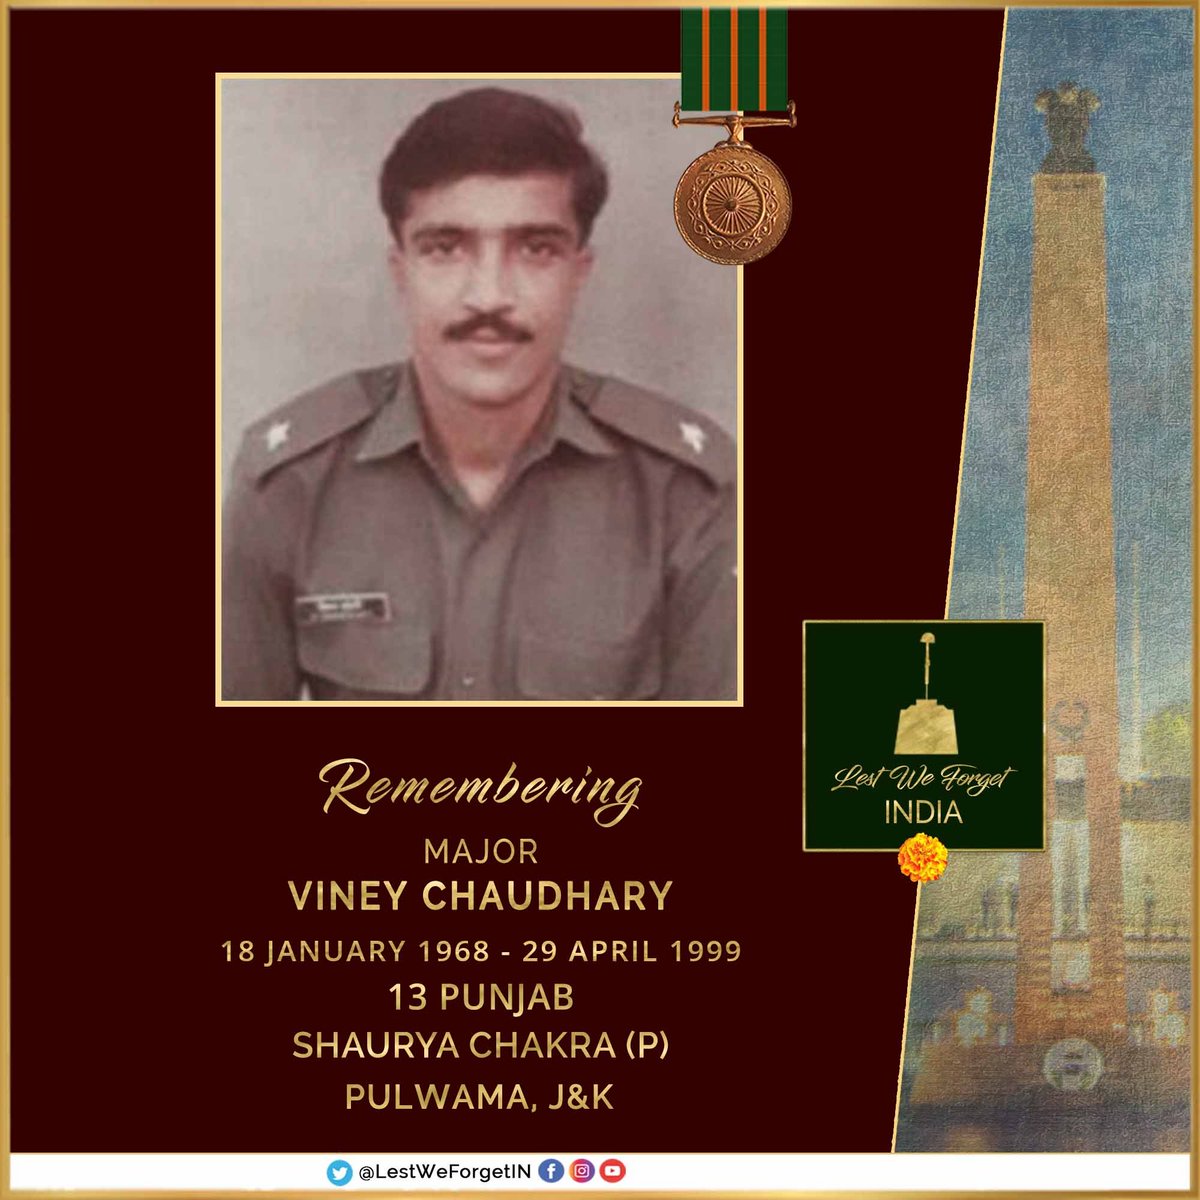 #LestWeForgetIndia🇮🇳 Major Viney Chaudhary, #ShauryaChakra (P), 13 PUNJAB, led his men in an anti-terror operation, eliminated three terrorists and injured another two before laying down his life #OnThisDay 29 April in 1999 at #Pulwama, J&K Maj Chaudhary who had developed an